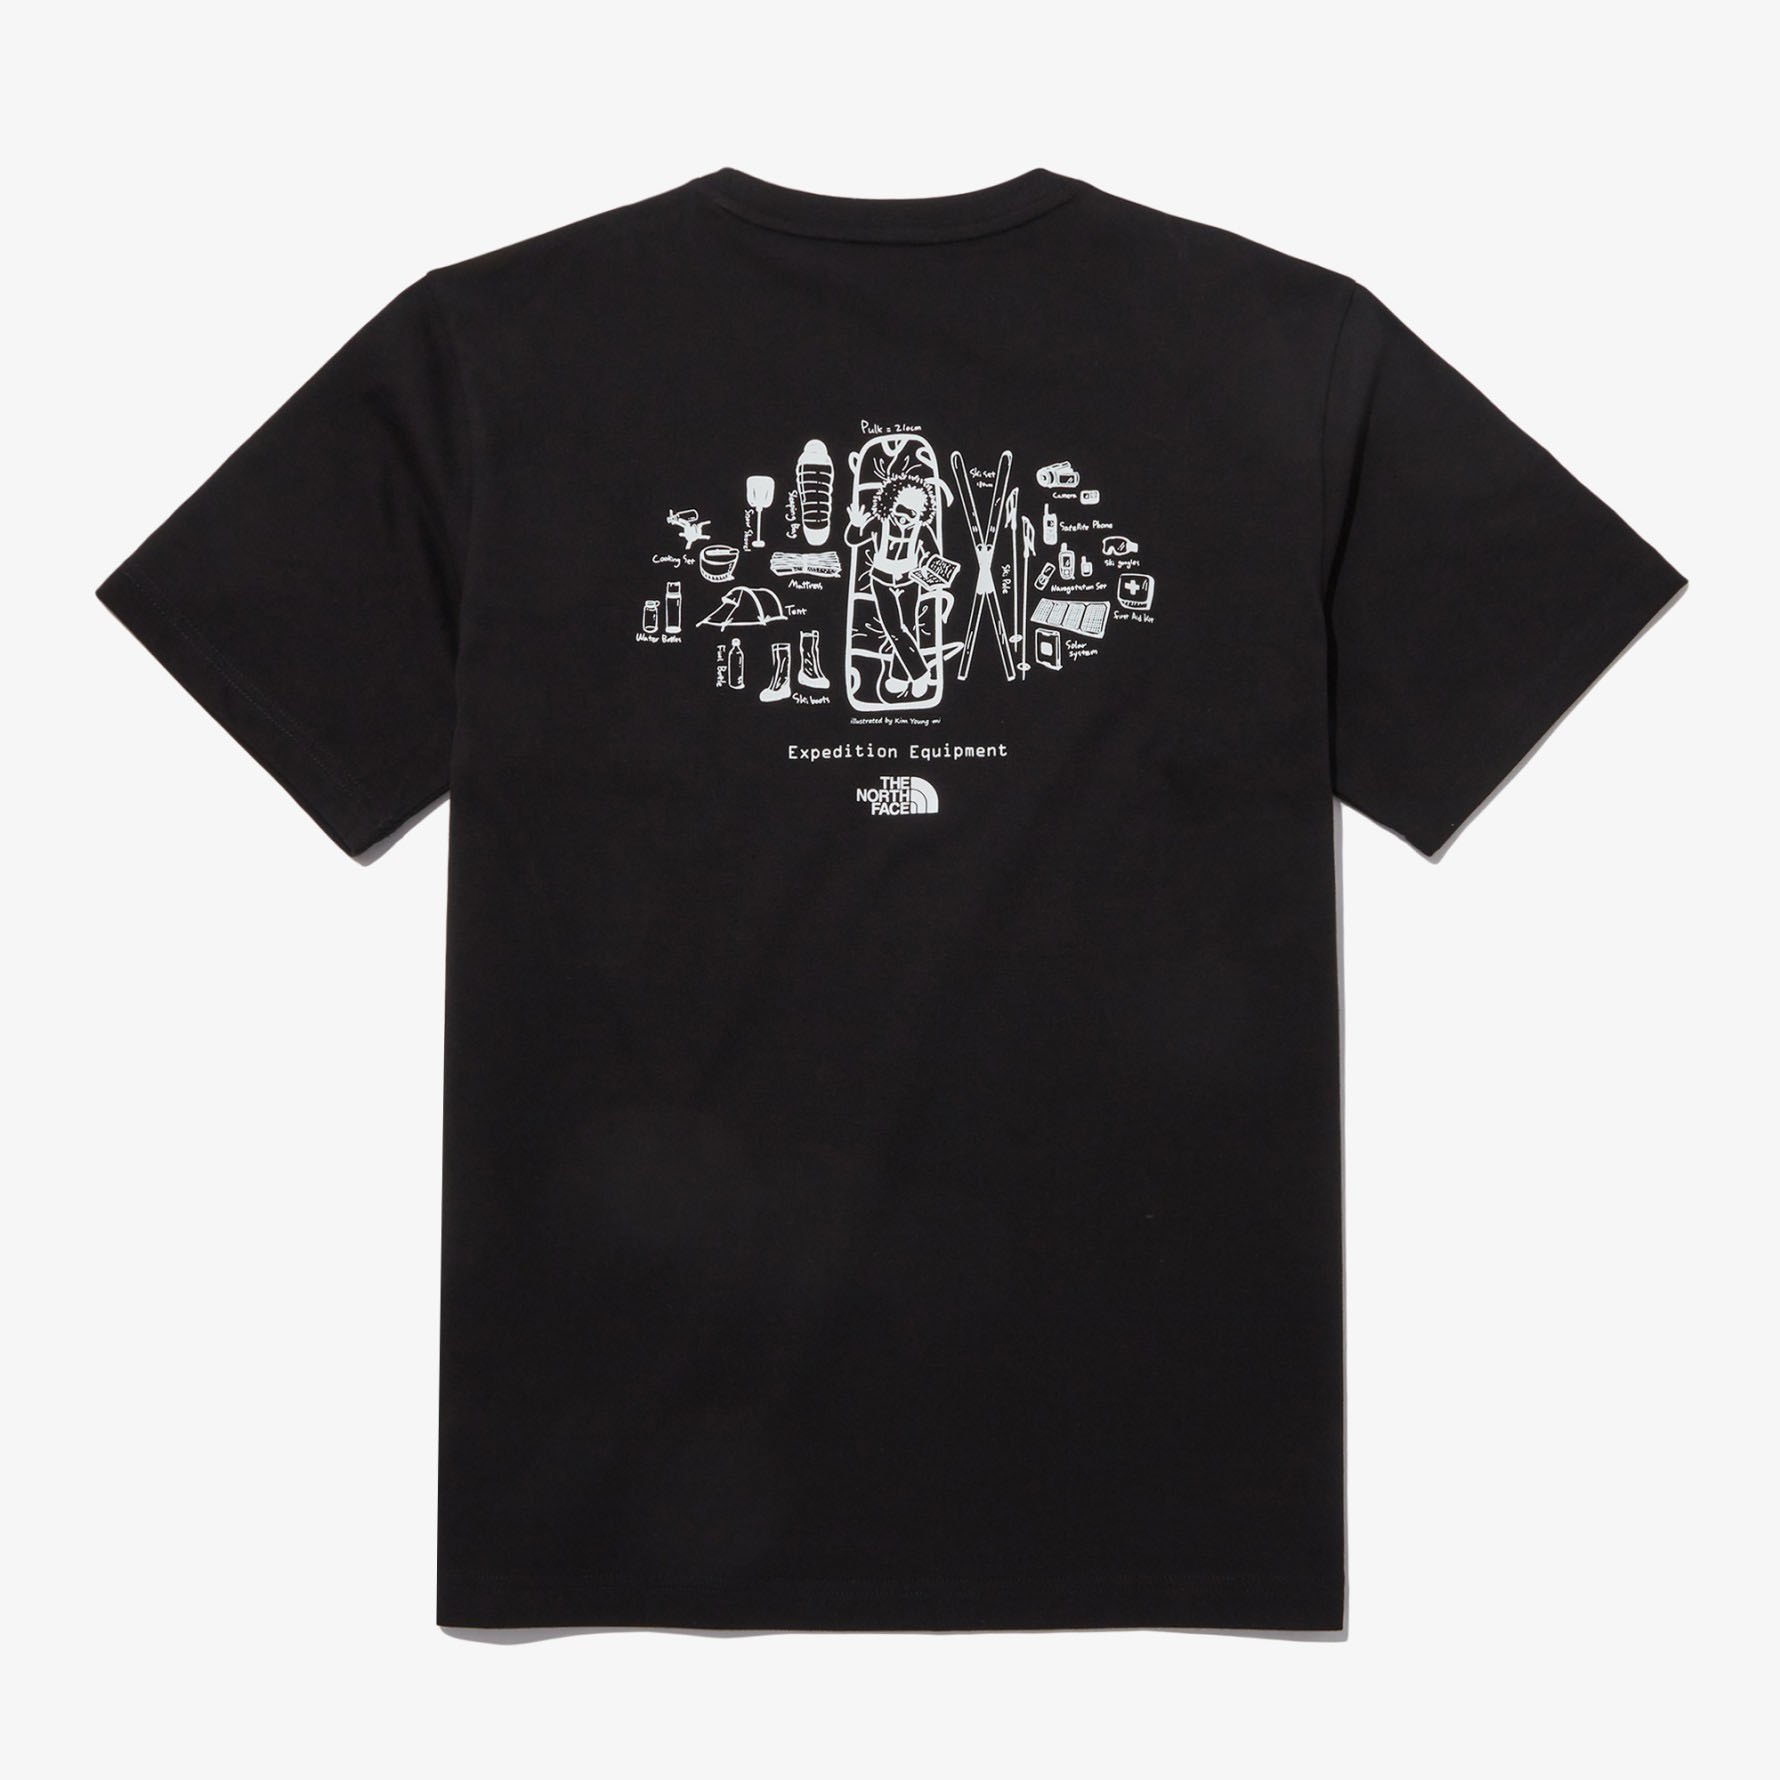 THE NORTH FACE ノースフェイス Tシャツ EXPEDITION S/S R/TEE 半袖Tシャツ プリントTシャツ WHITE BLACK GRAY バックプリント グラフィック NT7UP09A/B/C｜snkrs-aclo｜03